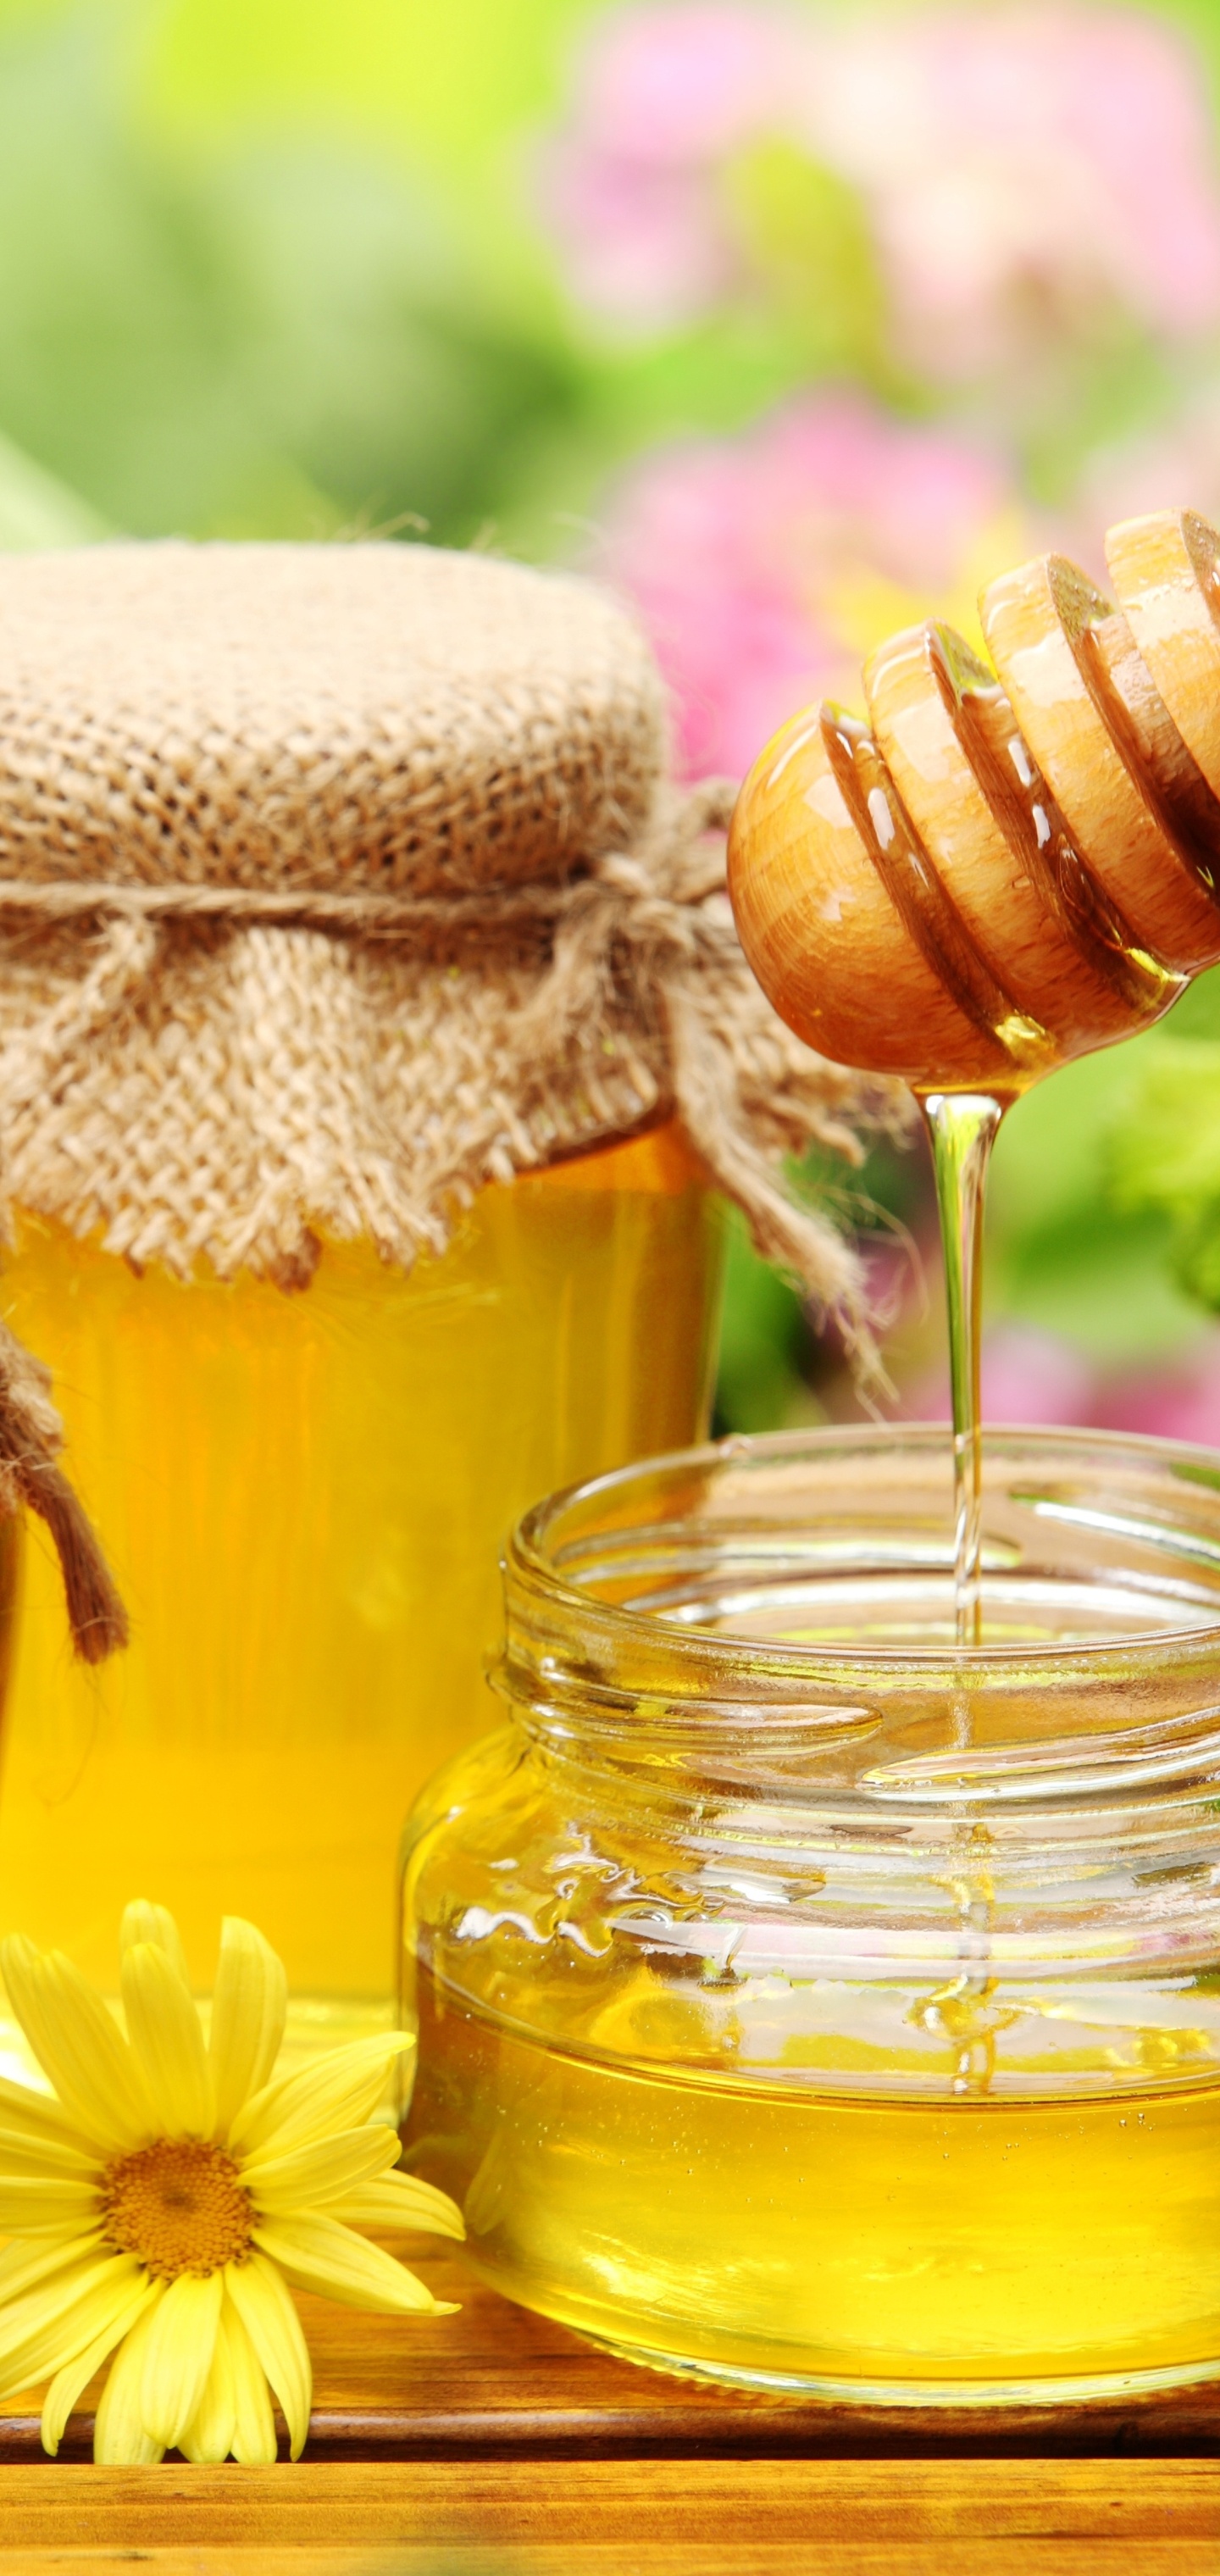 Honey: Used in cooking, baking, desserts, as a spread on bread, as an addition to various beverages such as tea, and as a sweetener in some commercial beverages. 1440x3040 HD Wallpaper.